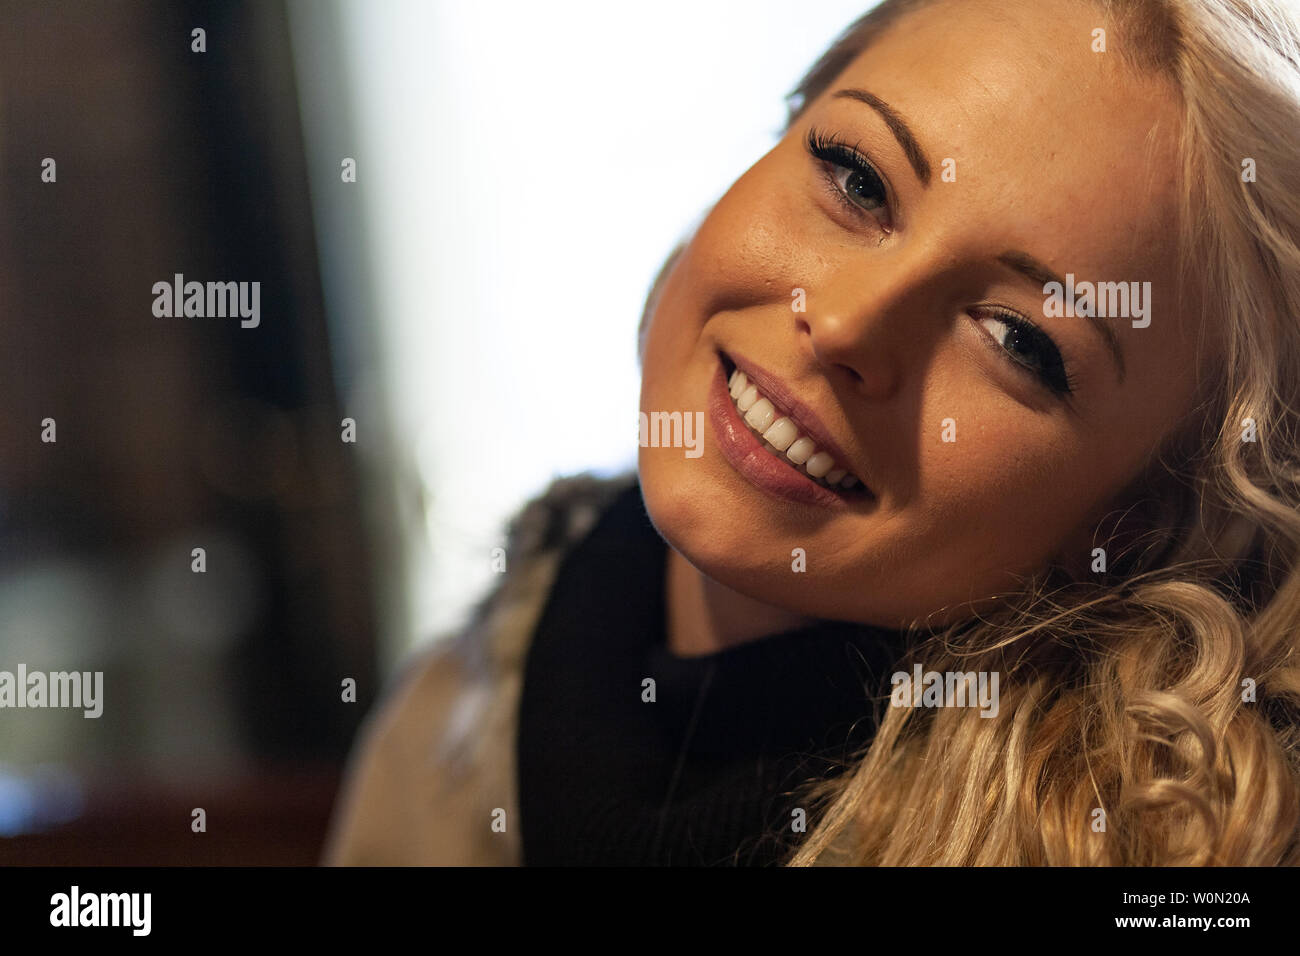 Pretty young blond woman with a sweet smile tilting her head as she looks at the camera in a close up cropped portrait Stock Photo